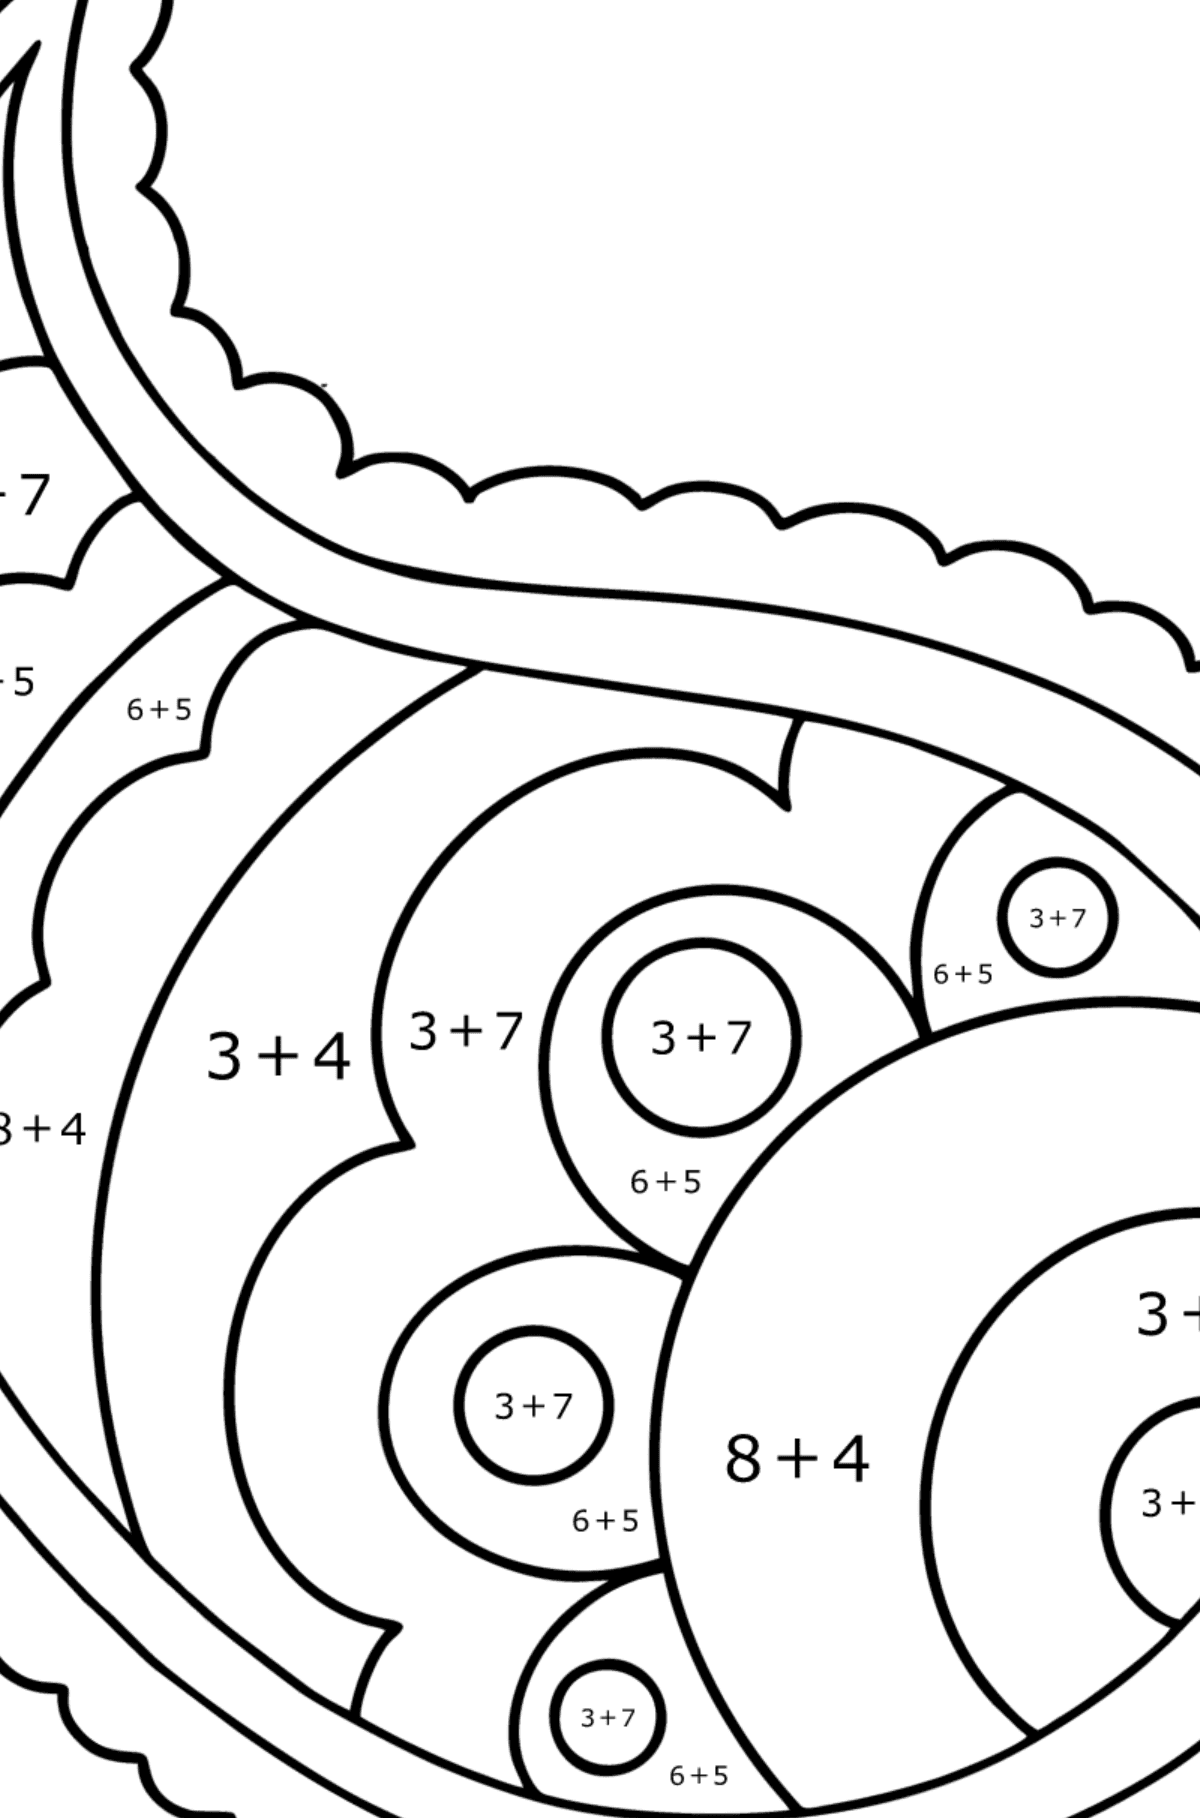 Paisley coloring page - 17 Elements - Math Coloring - Addition for Kids